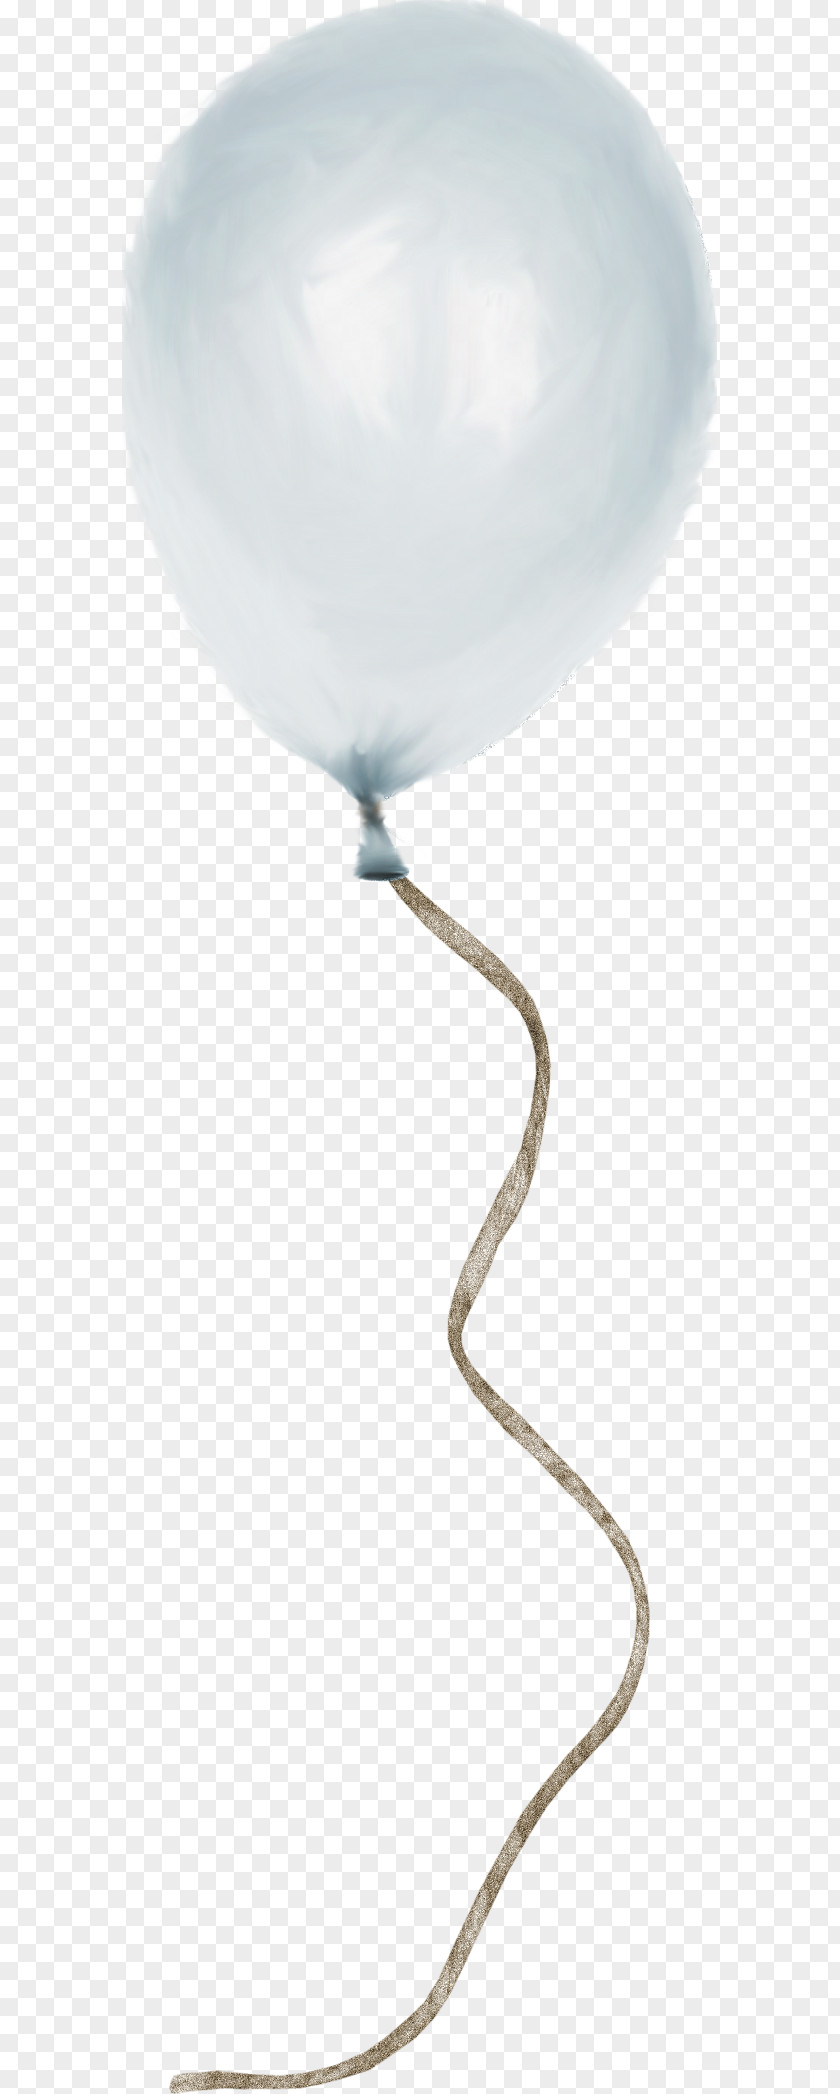 Transparent Balloon Transparency And Translucency PNG